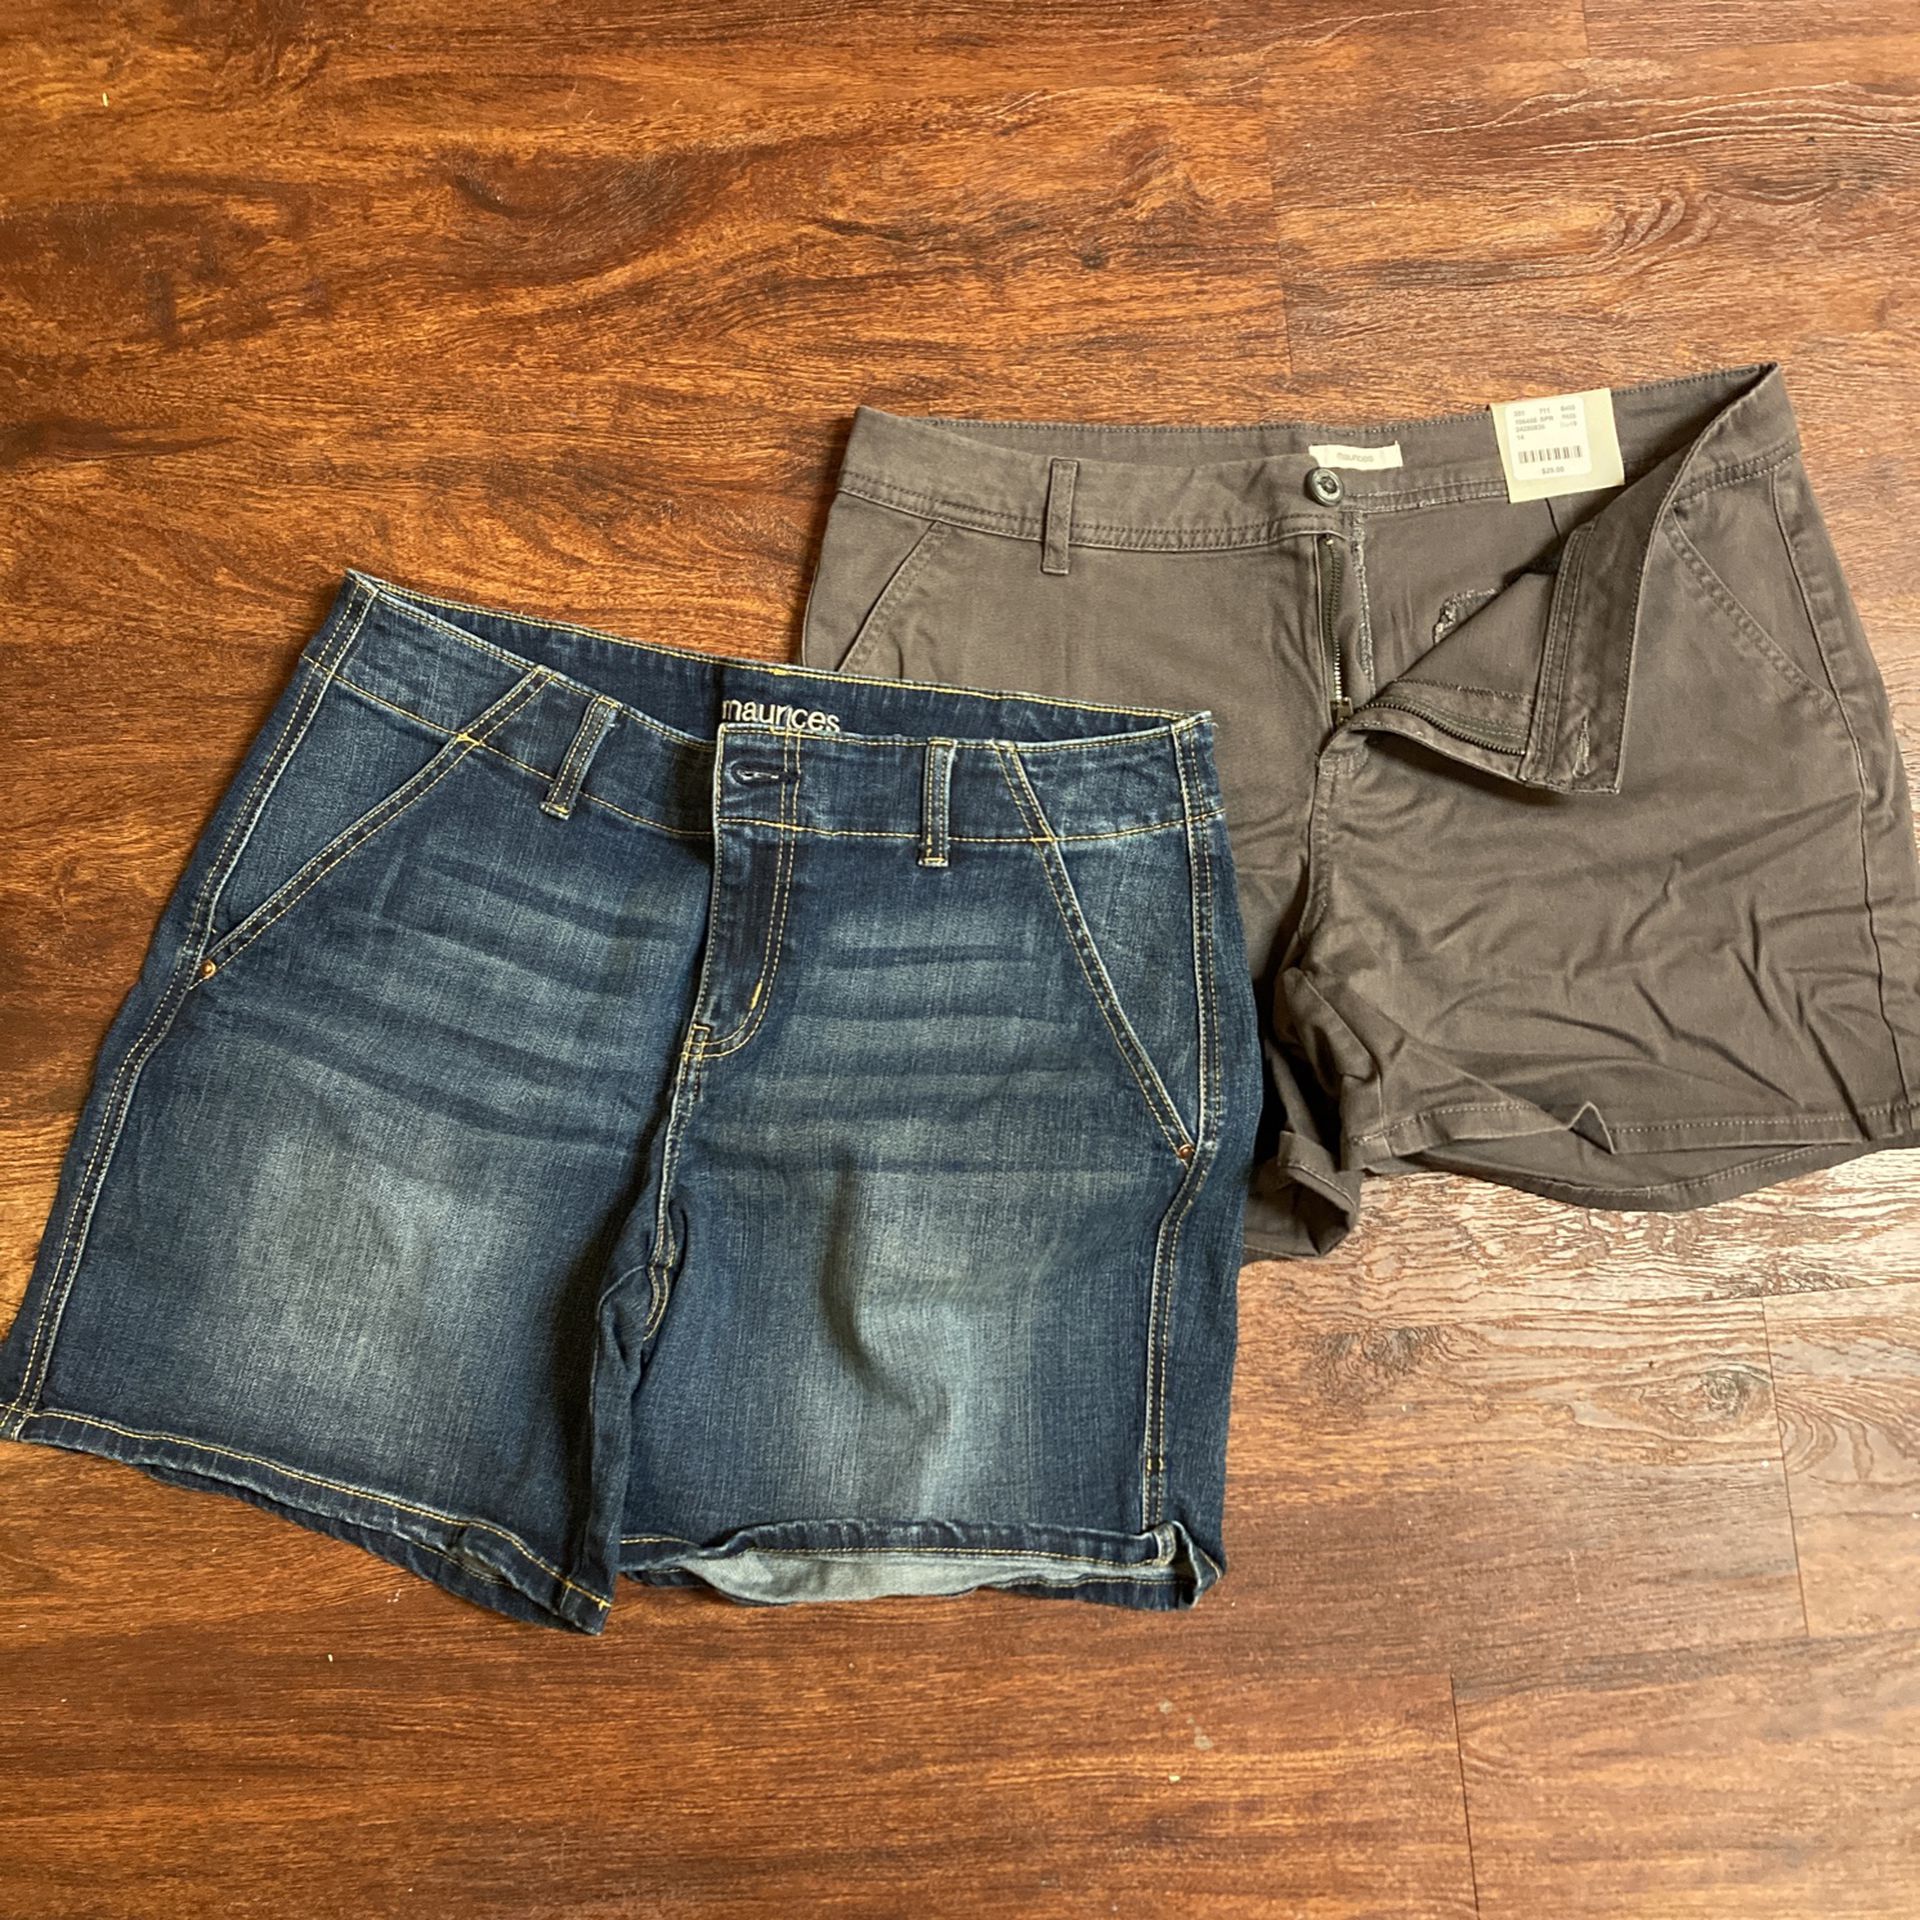 Shorts (Maurice’s, New, size 14)